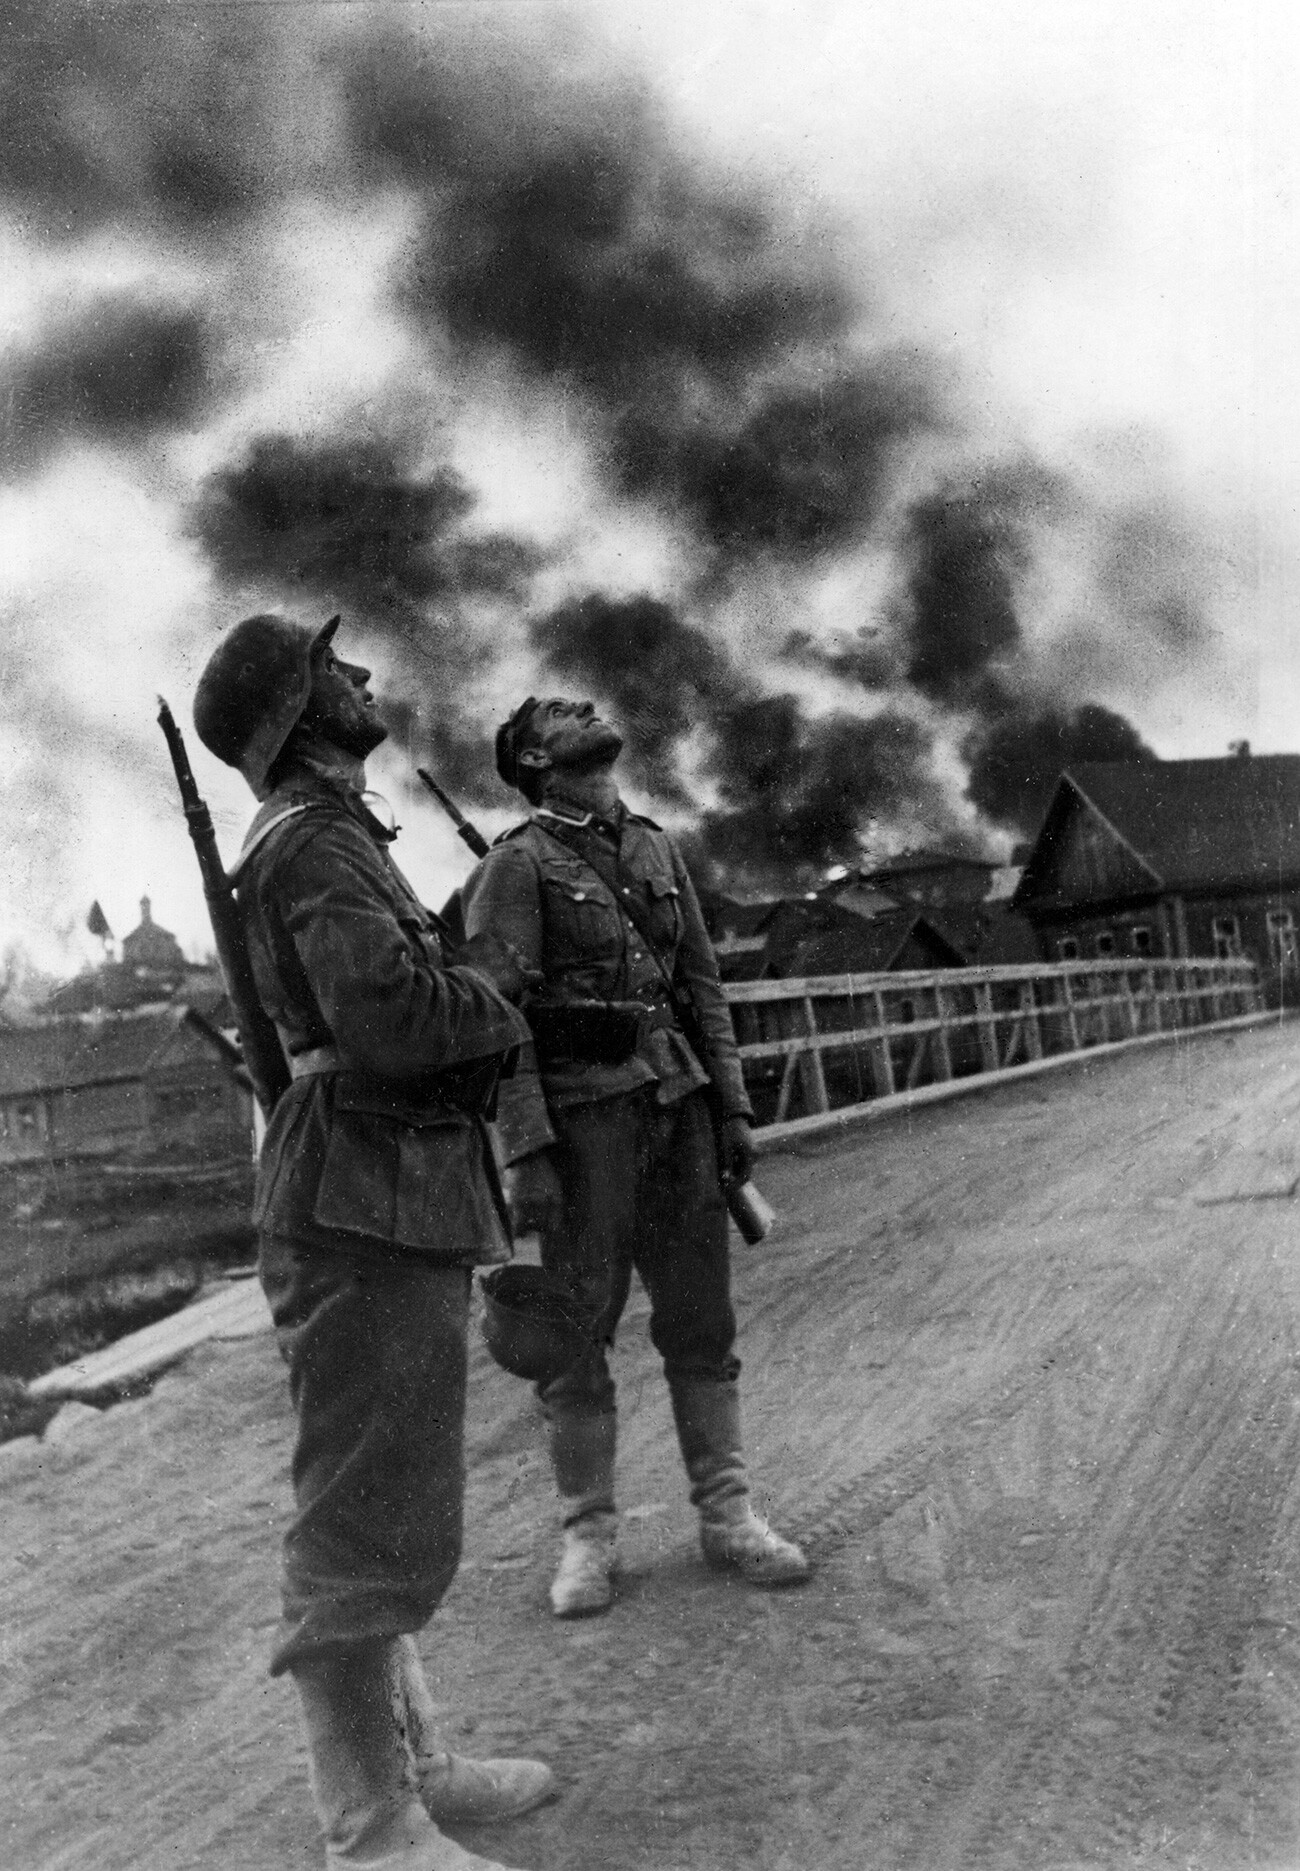 In the Vyazma area, two German infantrymen following an aerial battle between opposing fighters.